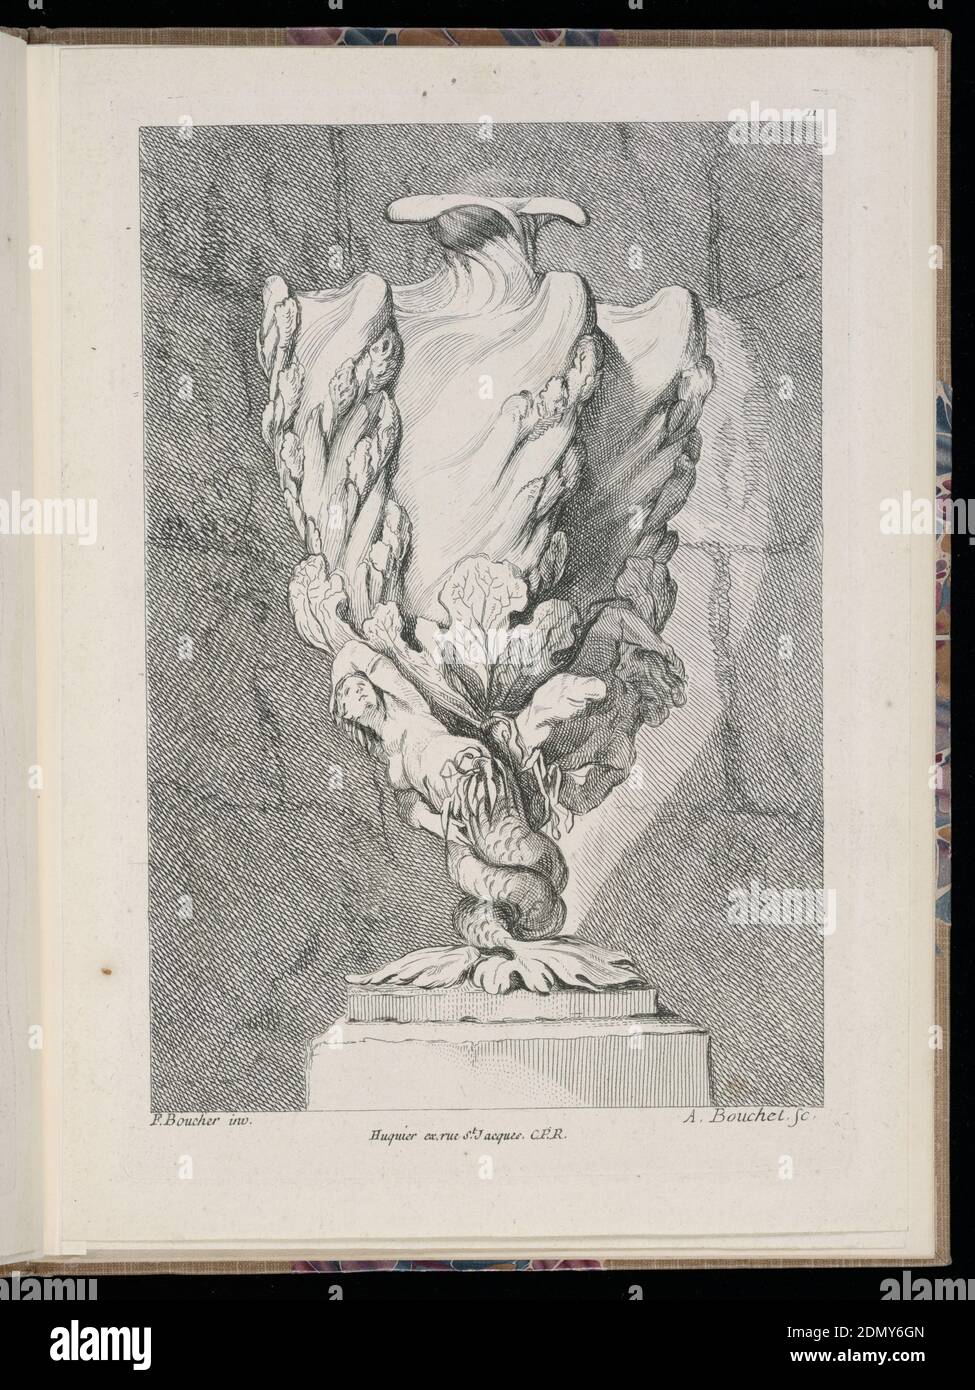 Plate 11, Livre de vases (Book of Vases), François Boucher, French, 1703 – 1770, A. Bouchet, French, active ca. 1730-1740, Chez Le Pere et Avaulez, Paris, France, Etching on cream laid paper, Folio 11, plate 11 of a series of 12. Design for a vase influenced by shell forms to be executed in metal, placed on a pedestal. The body, accentuated with rocky ribs and sea plant forms, rests upon a siren mermaid figure at left and a triton at right, their tails intertwined to form the base., Paris, France, 1738–72, metalwork, Bound print Stock Photo